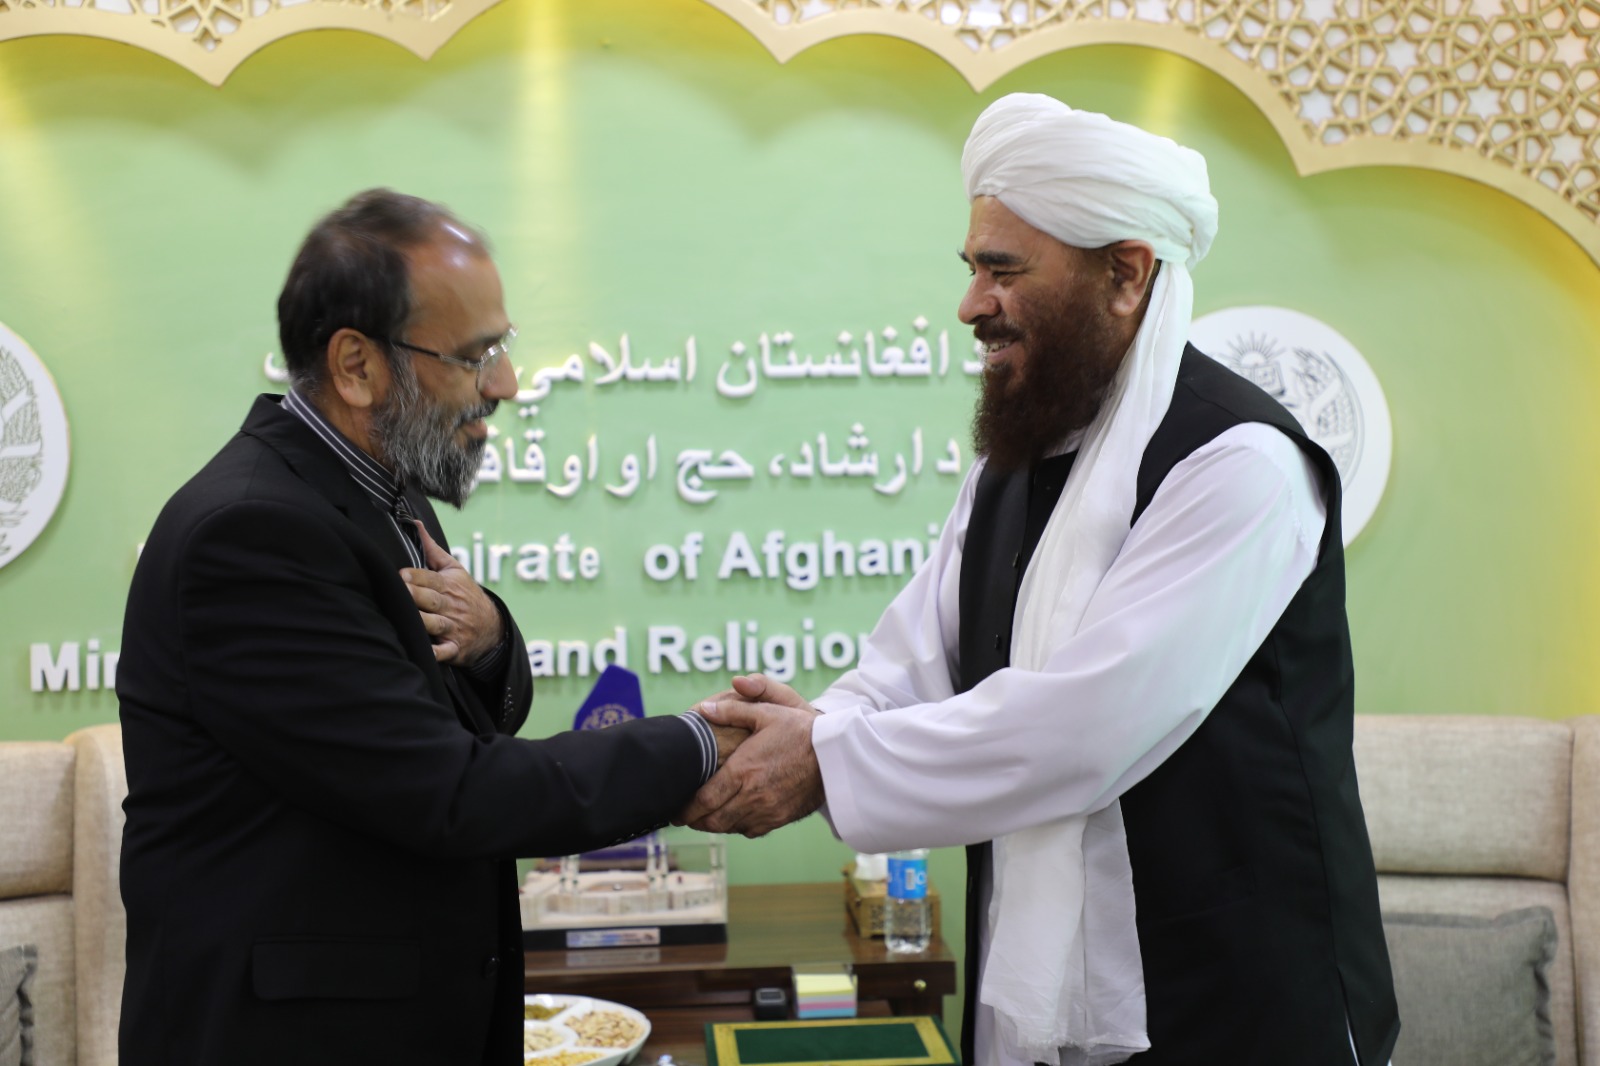 The Minister of MOHIA met with the Deputy of the Iranian Embassy in Kabul."